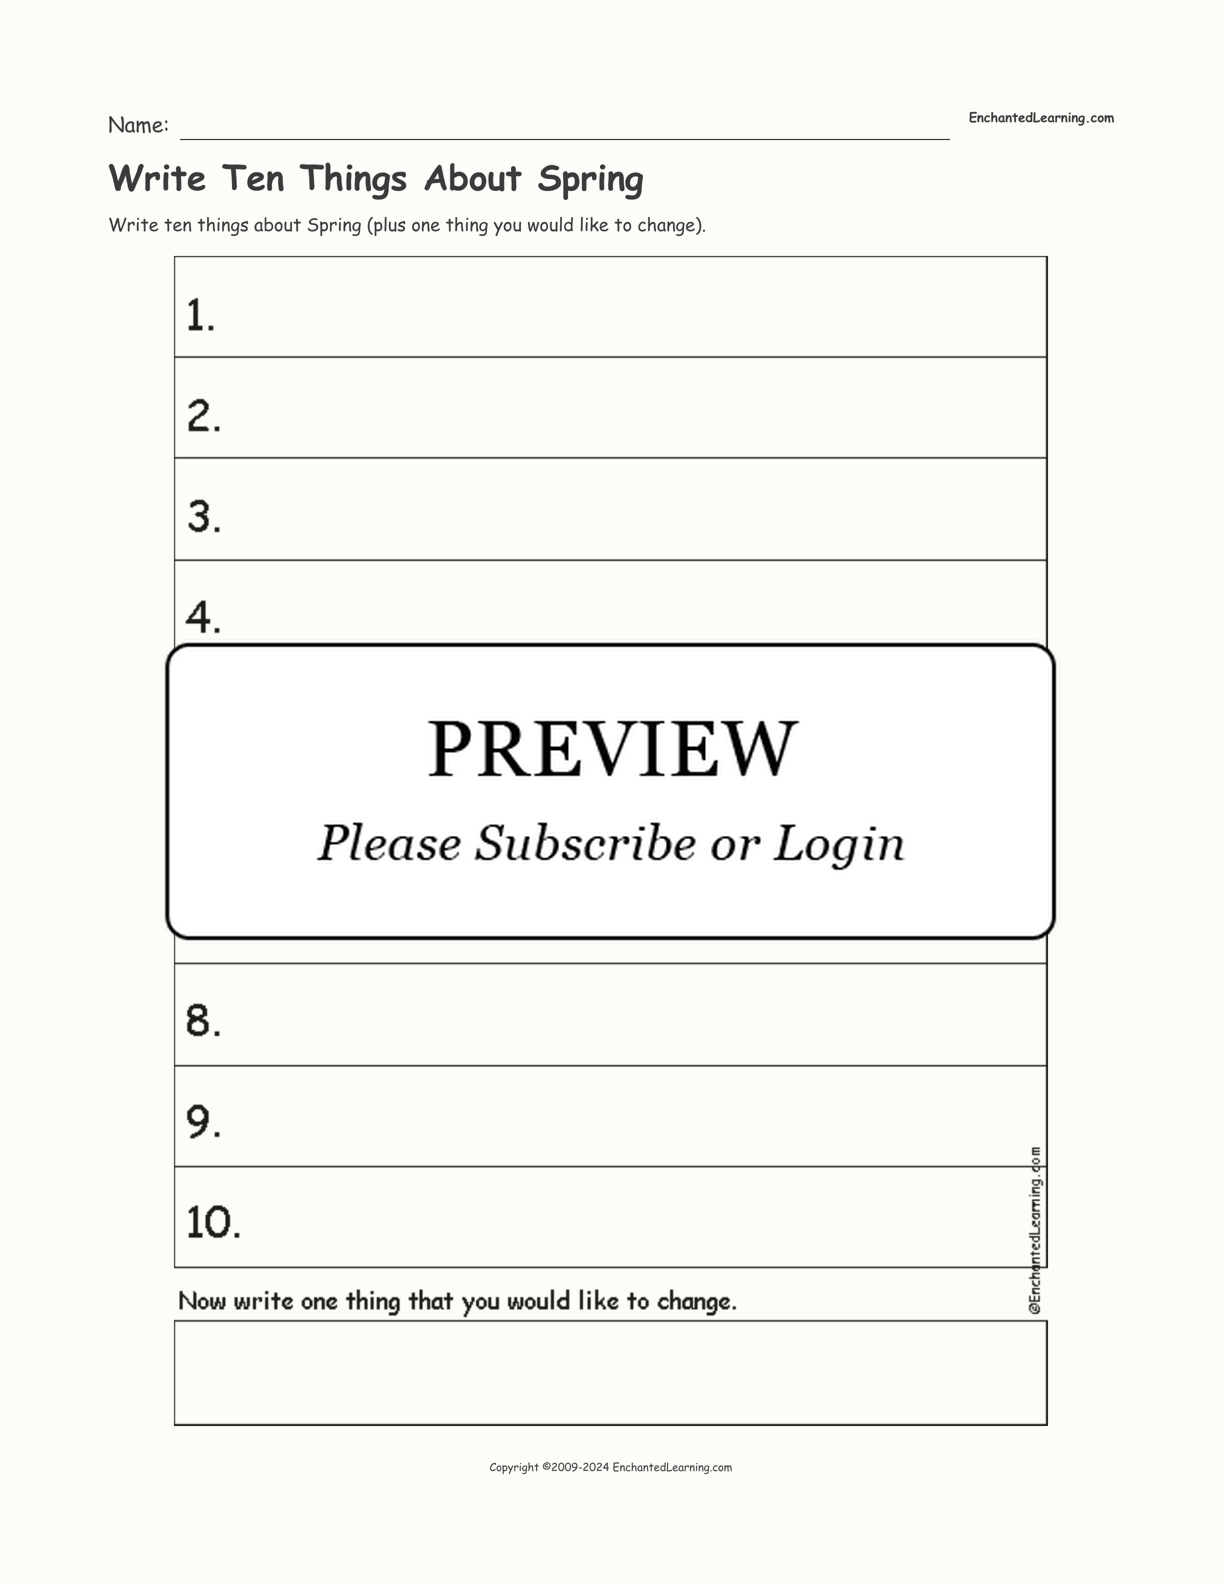 Write Ten Things About Spring interactive worksheet page 1